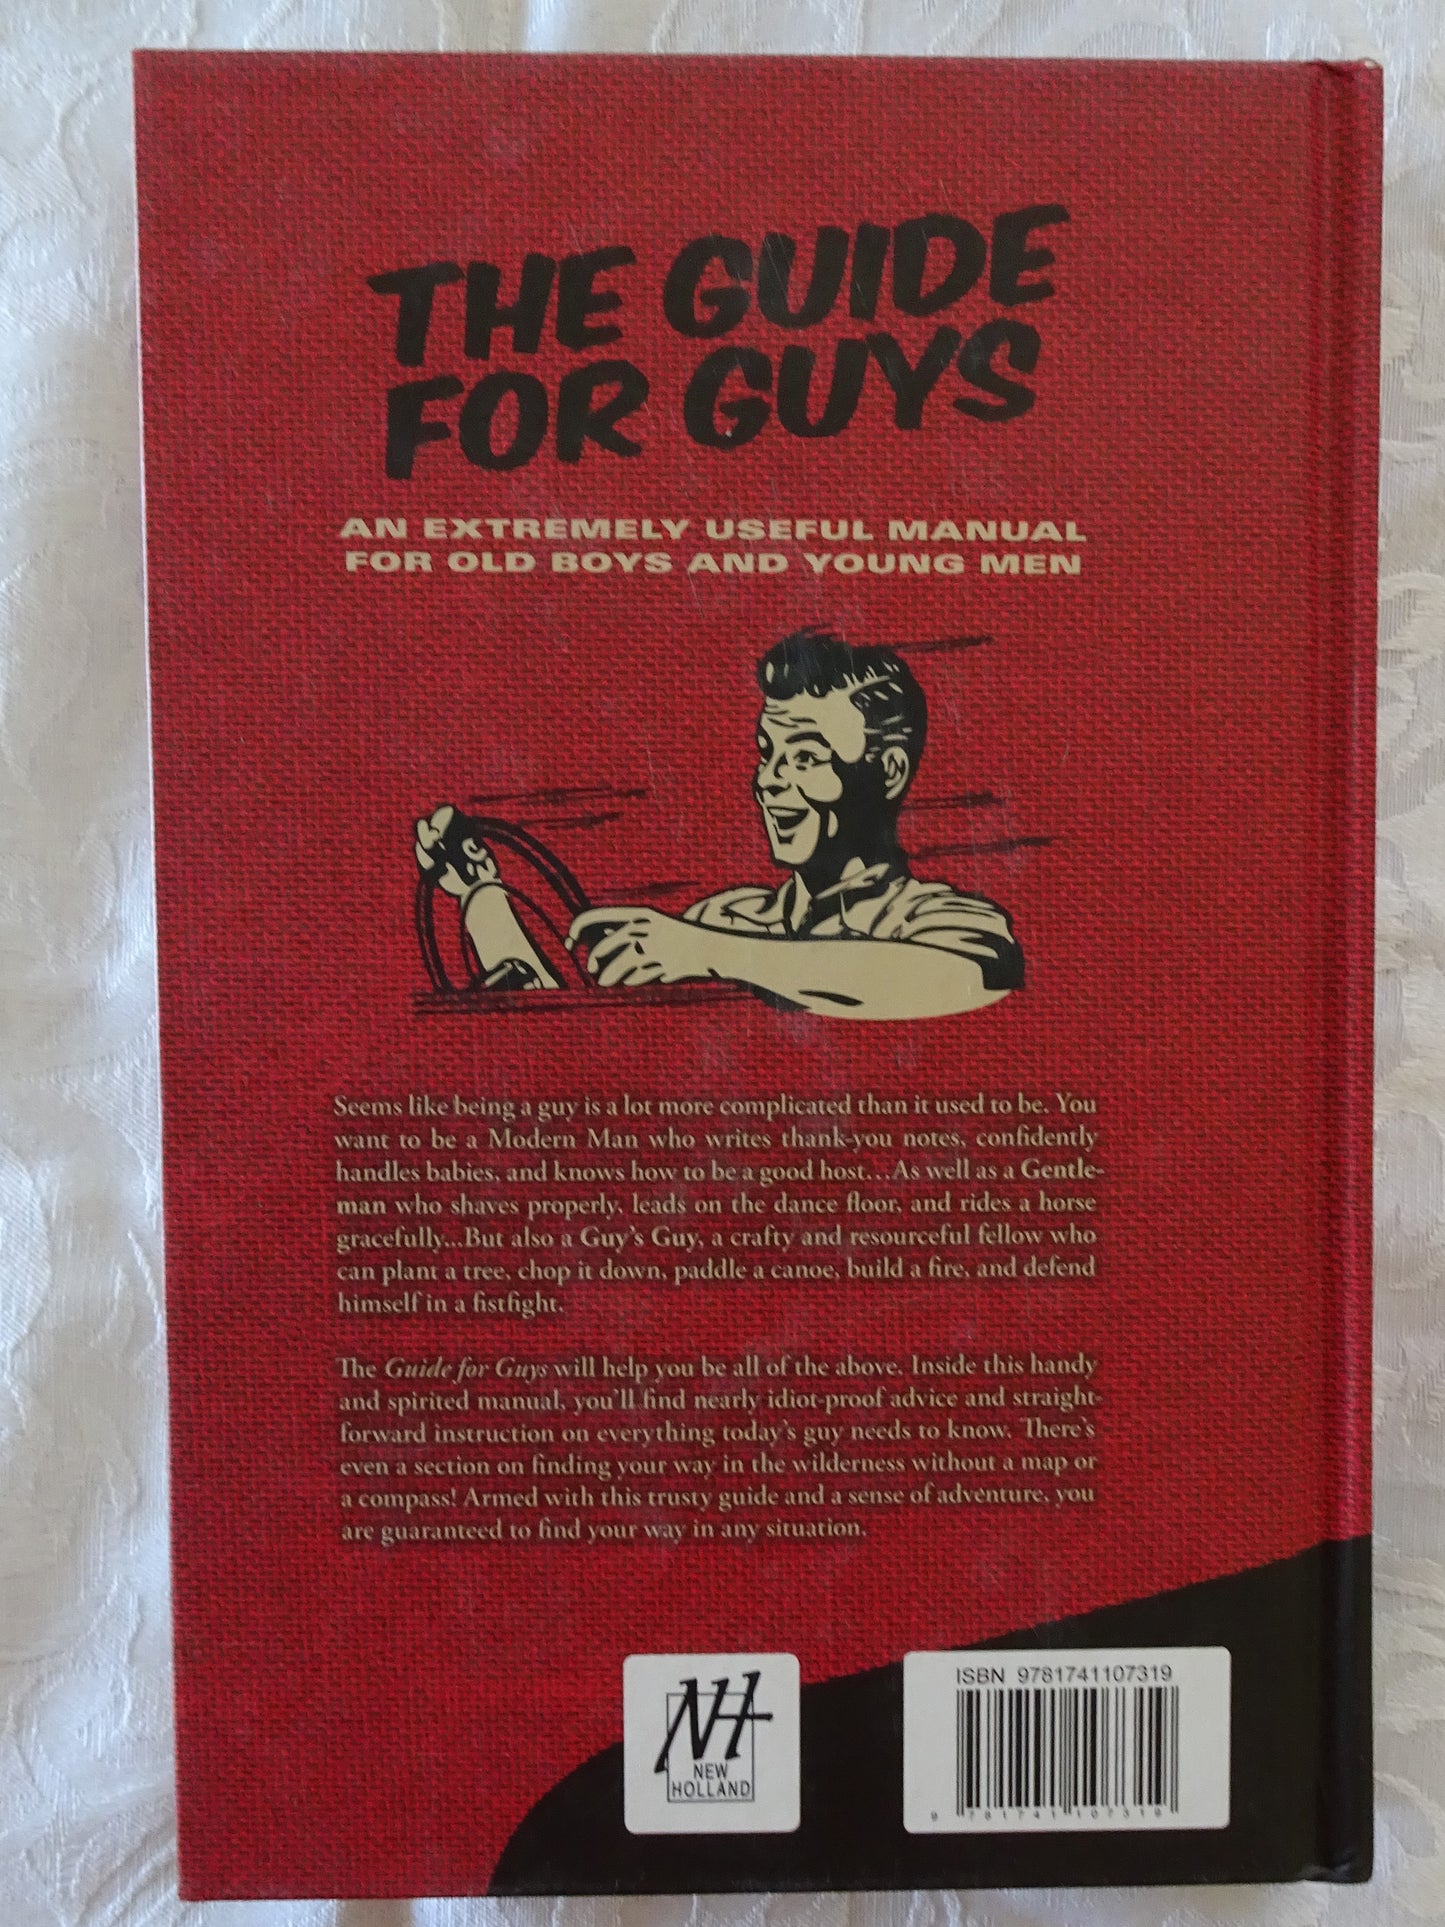 The Guide For Guys by Michael Powell